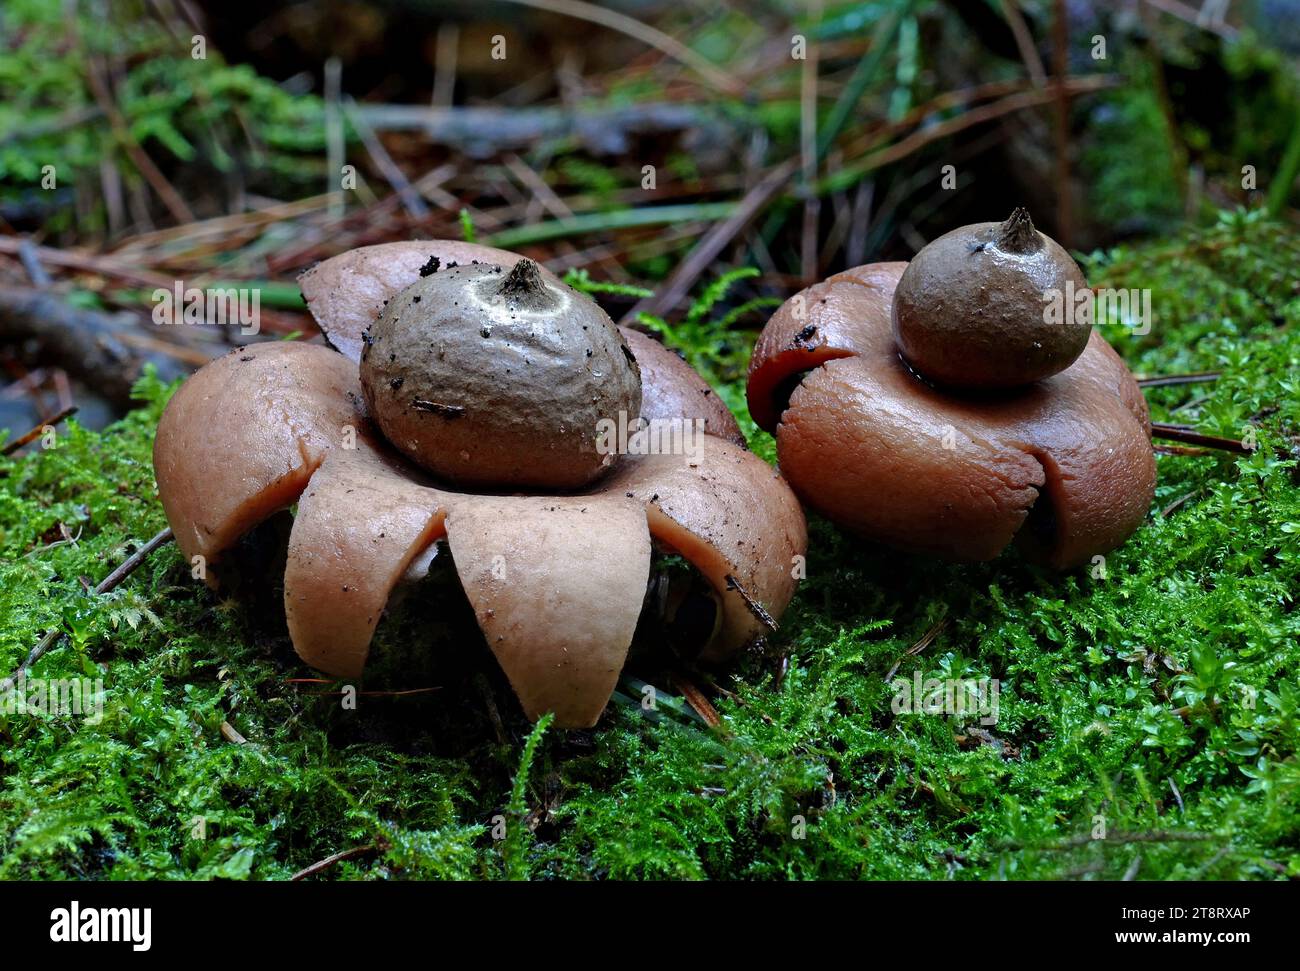 A pair of earth stars.(Geastrales), Earthstar fungus isnt hard to spot because of its distinct, star-like appearance. The colors arent star-like though, as the oddly beautiful earthstar fungus displays various shades of brownish-gray. The central puffball, or sac, is smooth, while the pointy arms have a crackled appearance. This interesting fungus is also known as barometer earthstar because it reacts to the level of humidity in the air. When the air is dry, the points fold up around the puffball to protect it from weather and from various predators. Stock Photo